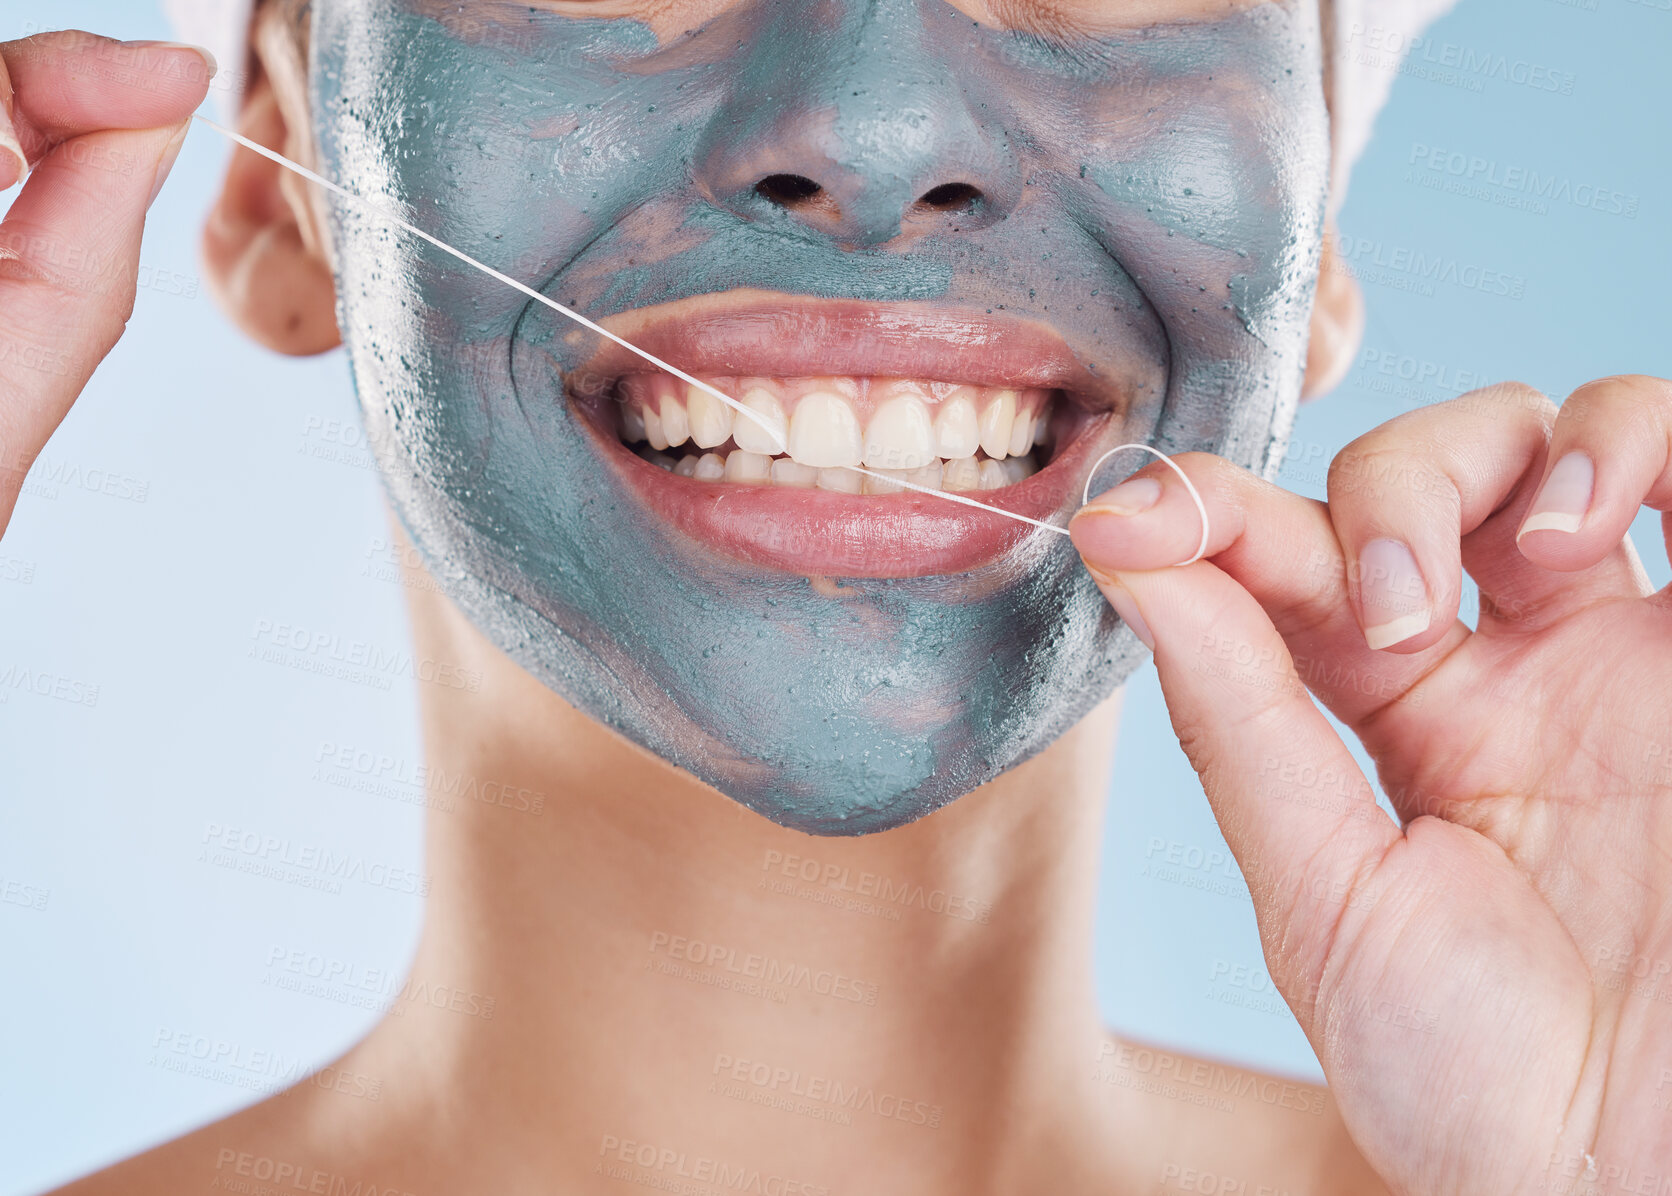 Buy stock photo Dental, face mask and woman flossing her teeth for healthy and strong teeth in a studio portrait with a blue background. Girl cleaning her mouth, face and skin with beauty self care and oral hygiene